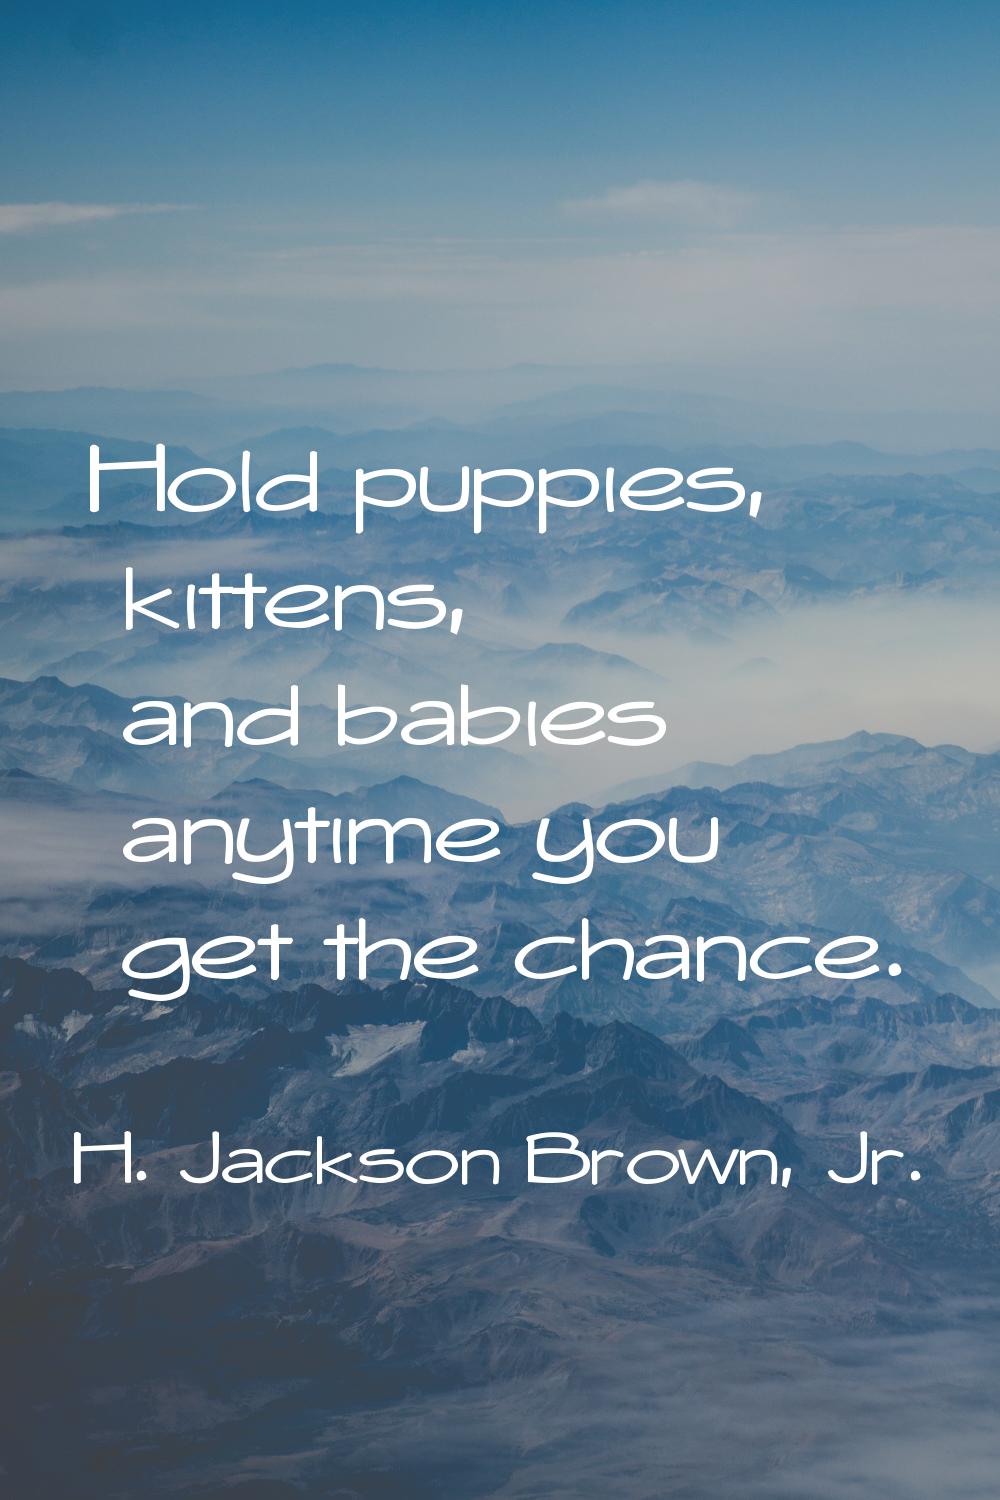 Hold puppies, kittens, and babies anytime you get the chance.